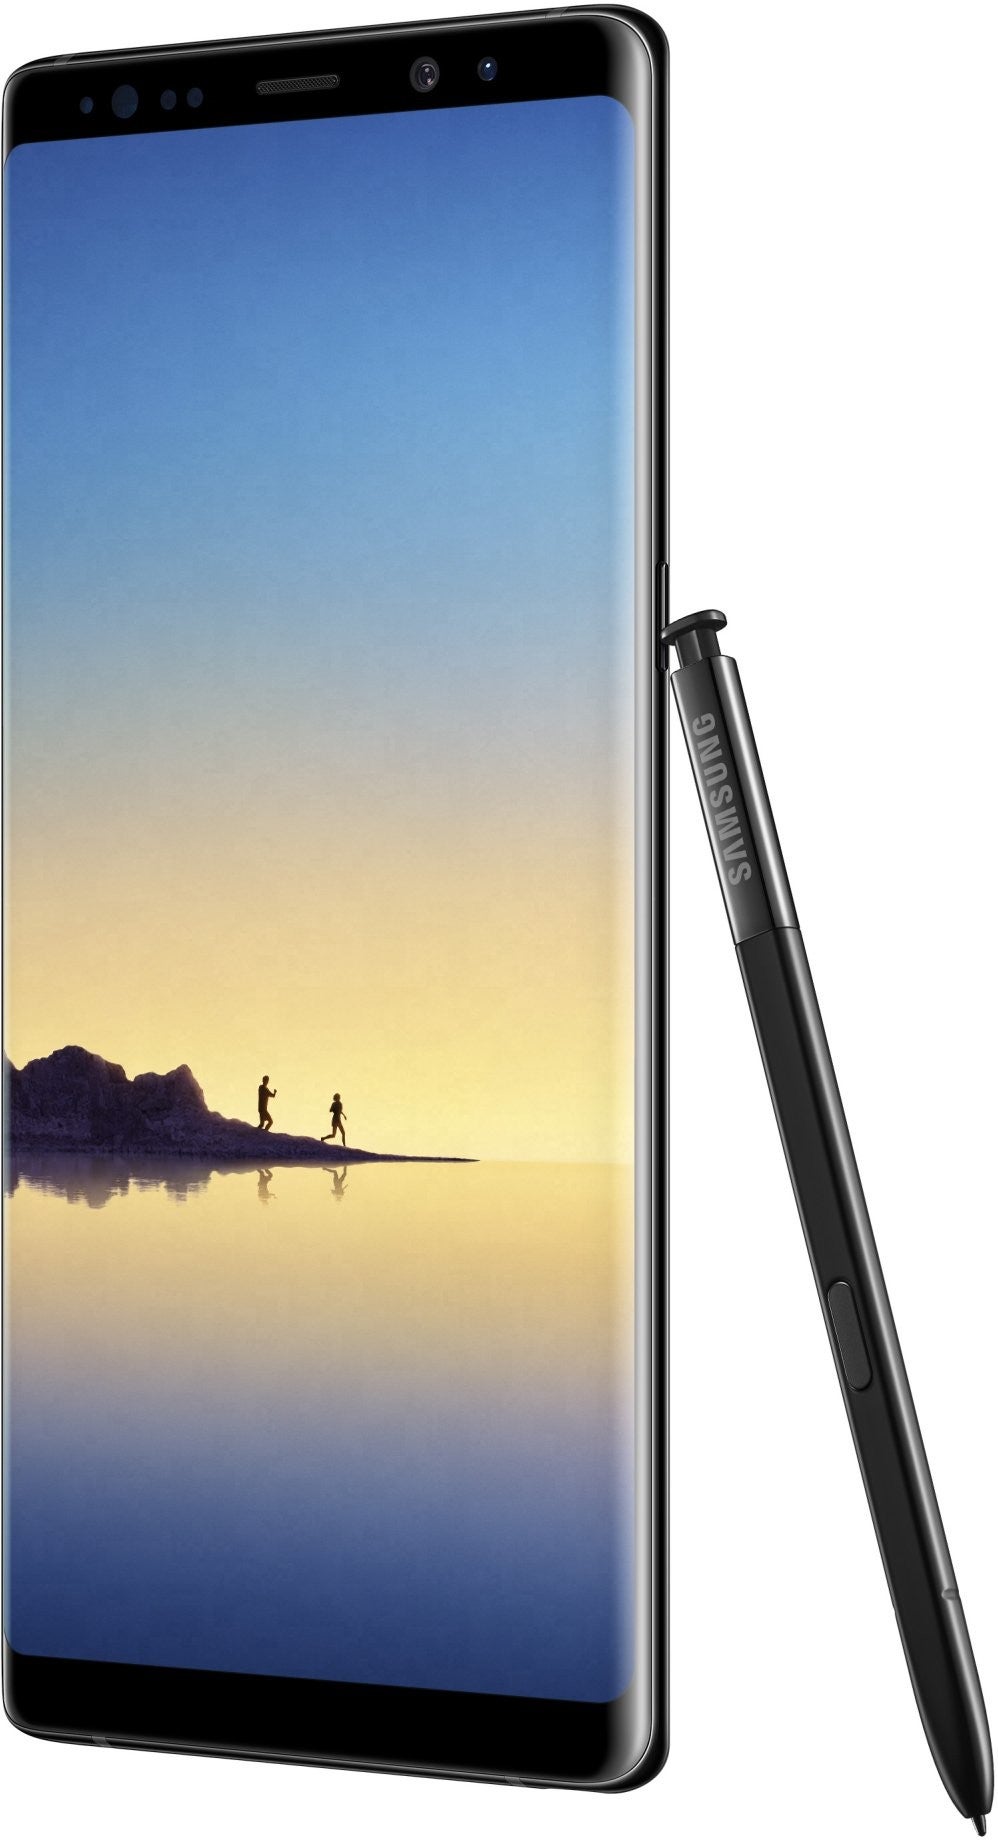 Expect Samsung Galaxy Note 8 to come with a transparent case in some countries